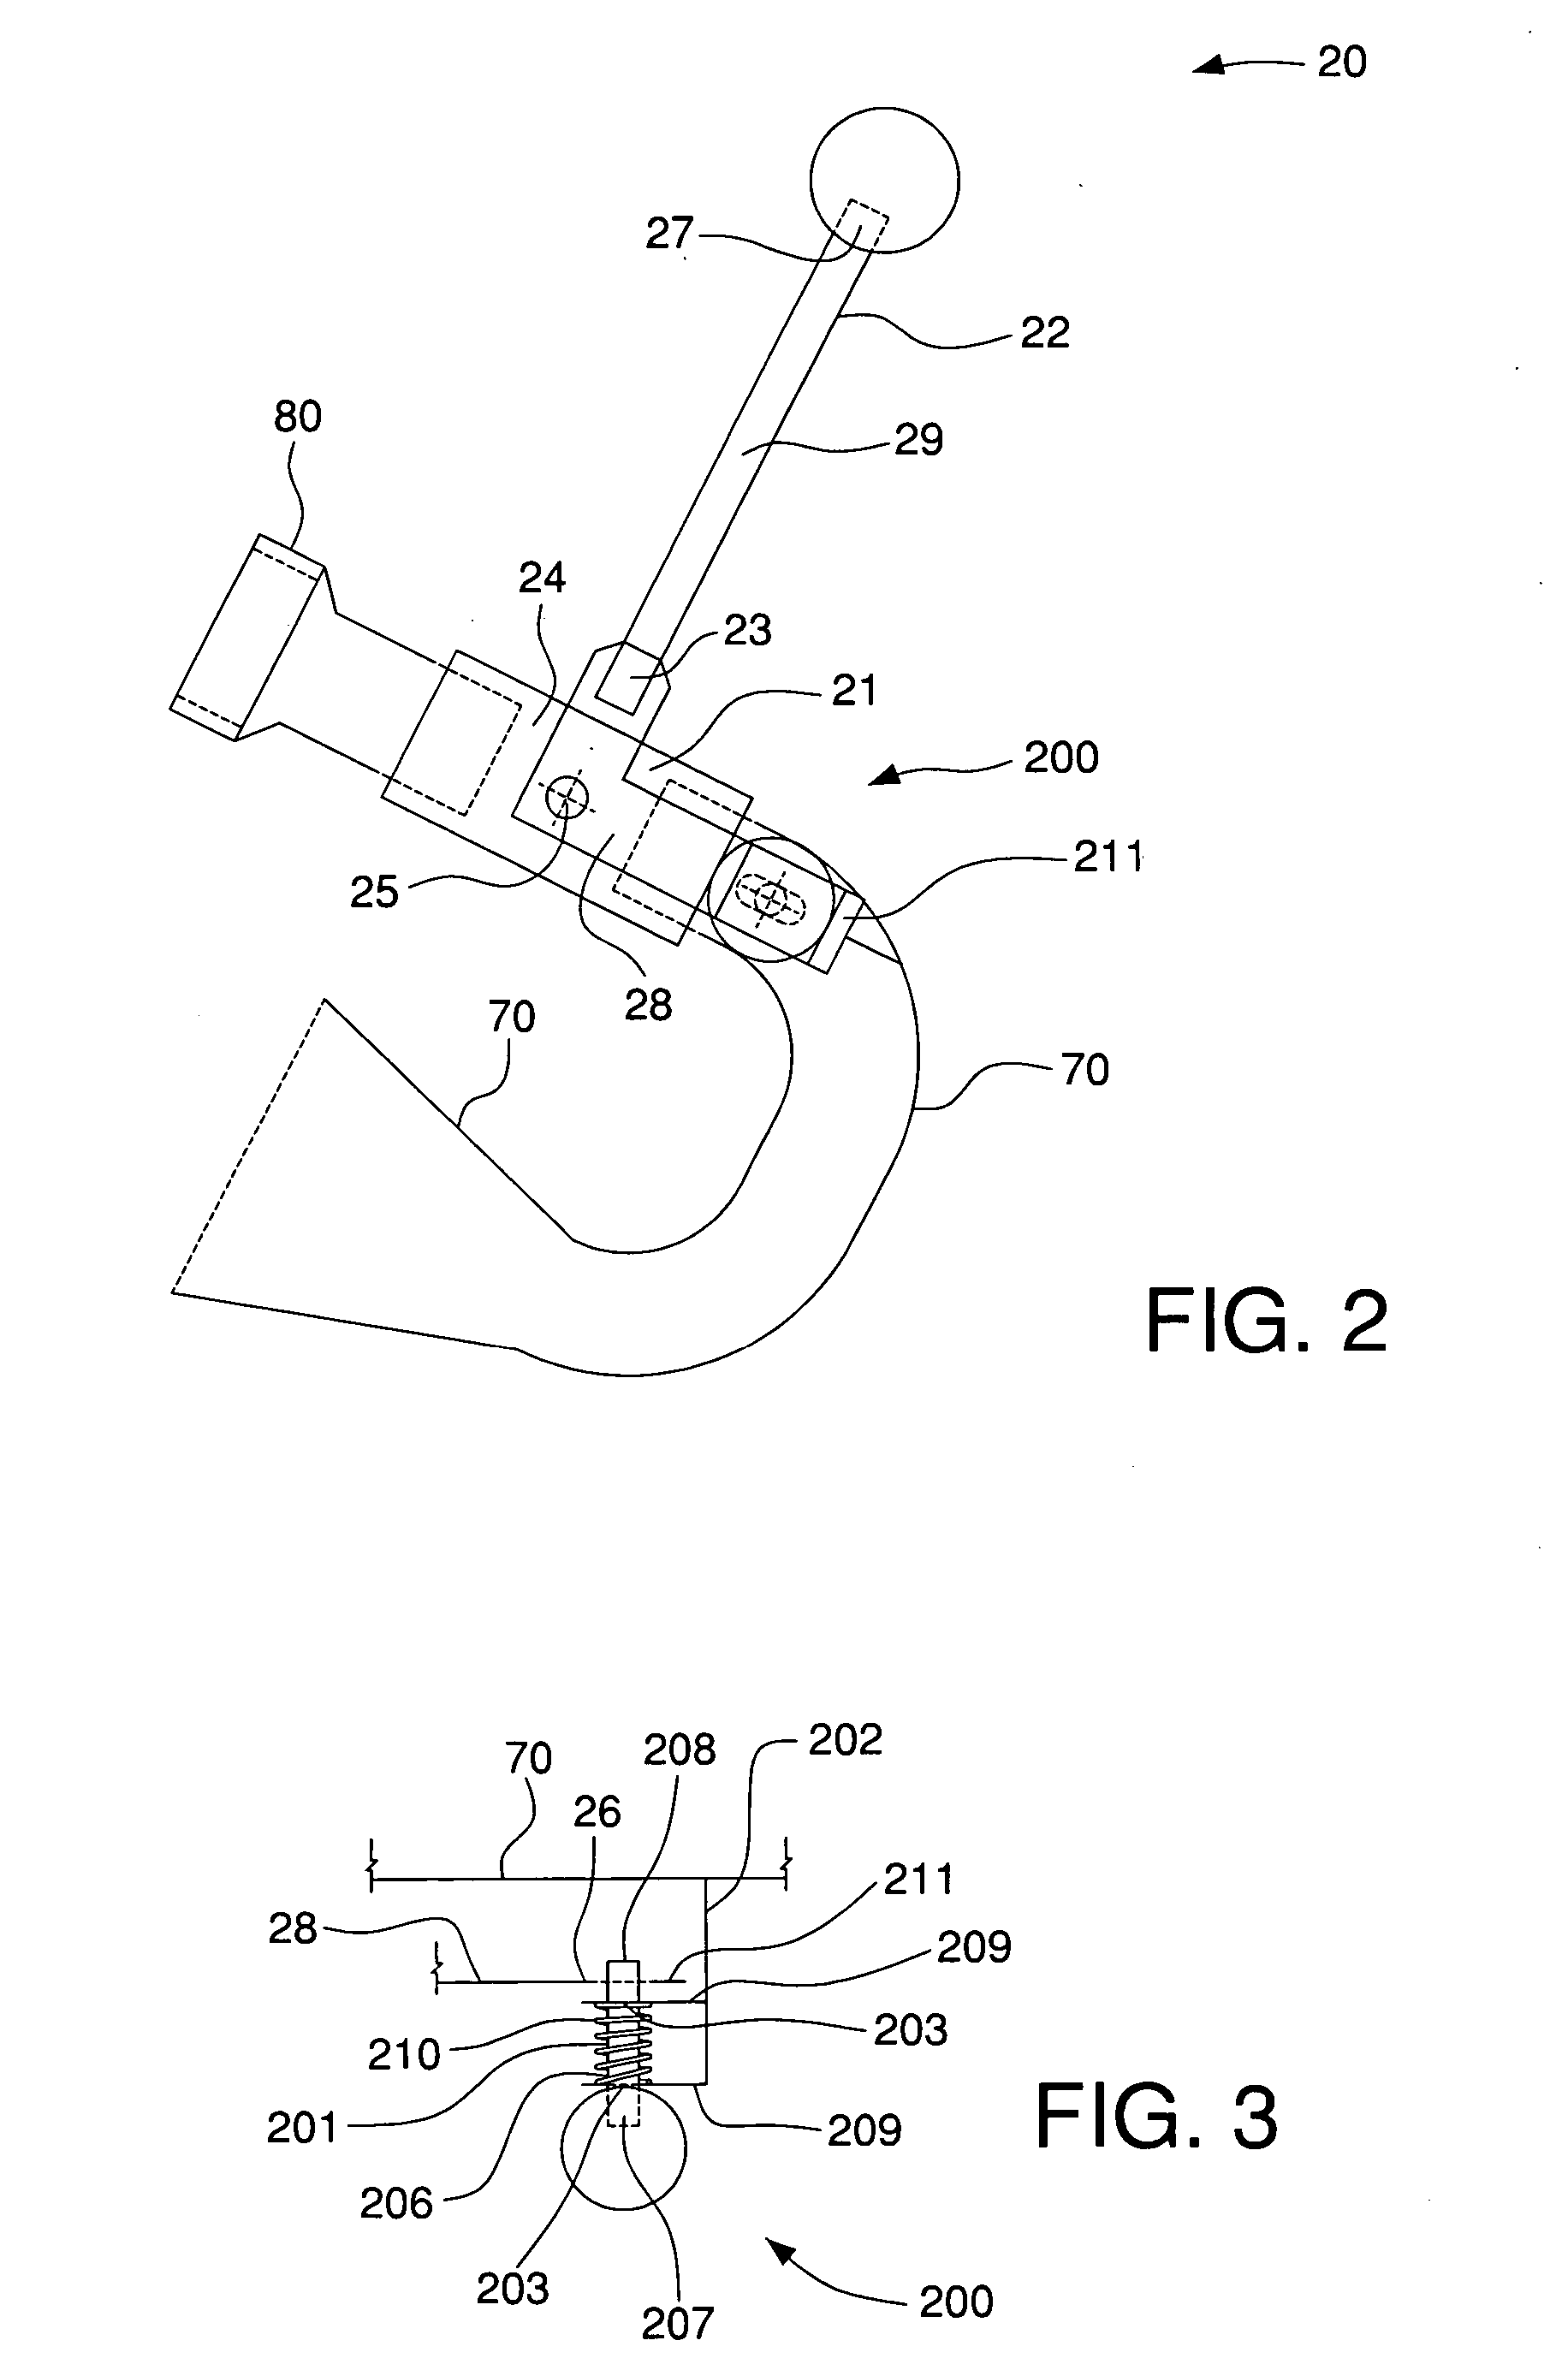 Fishing line casting and bait projectile system